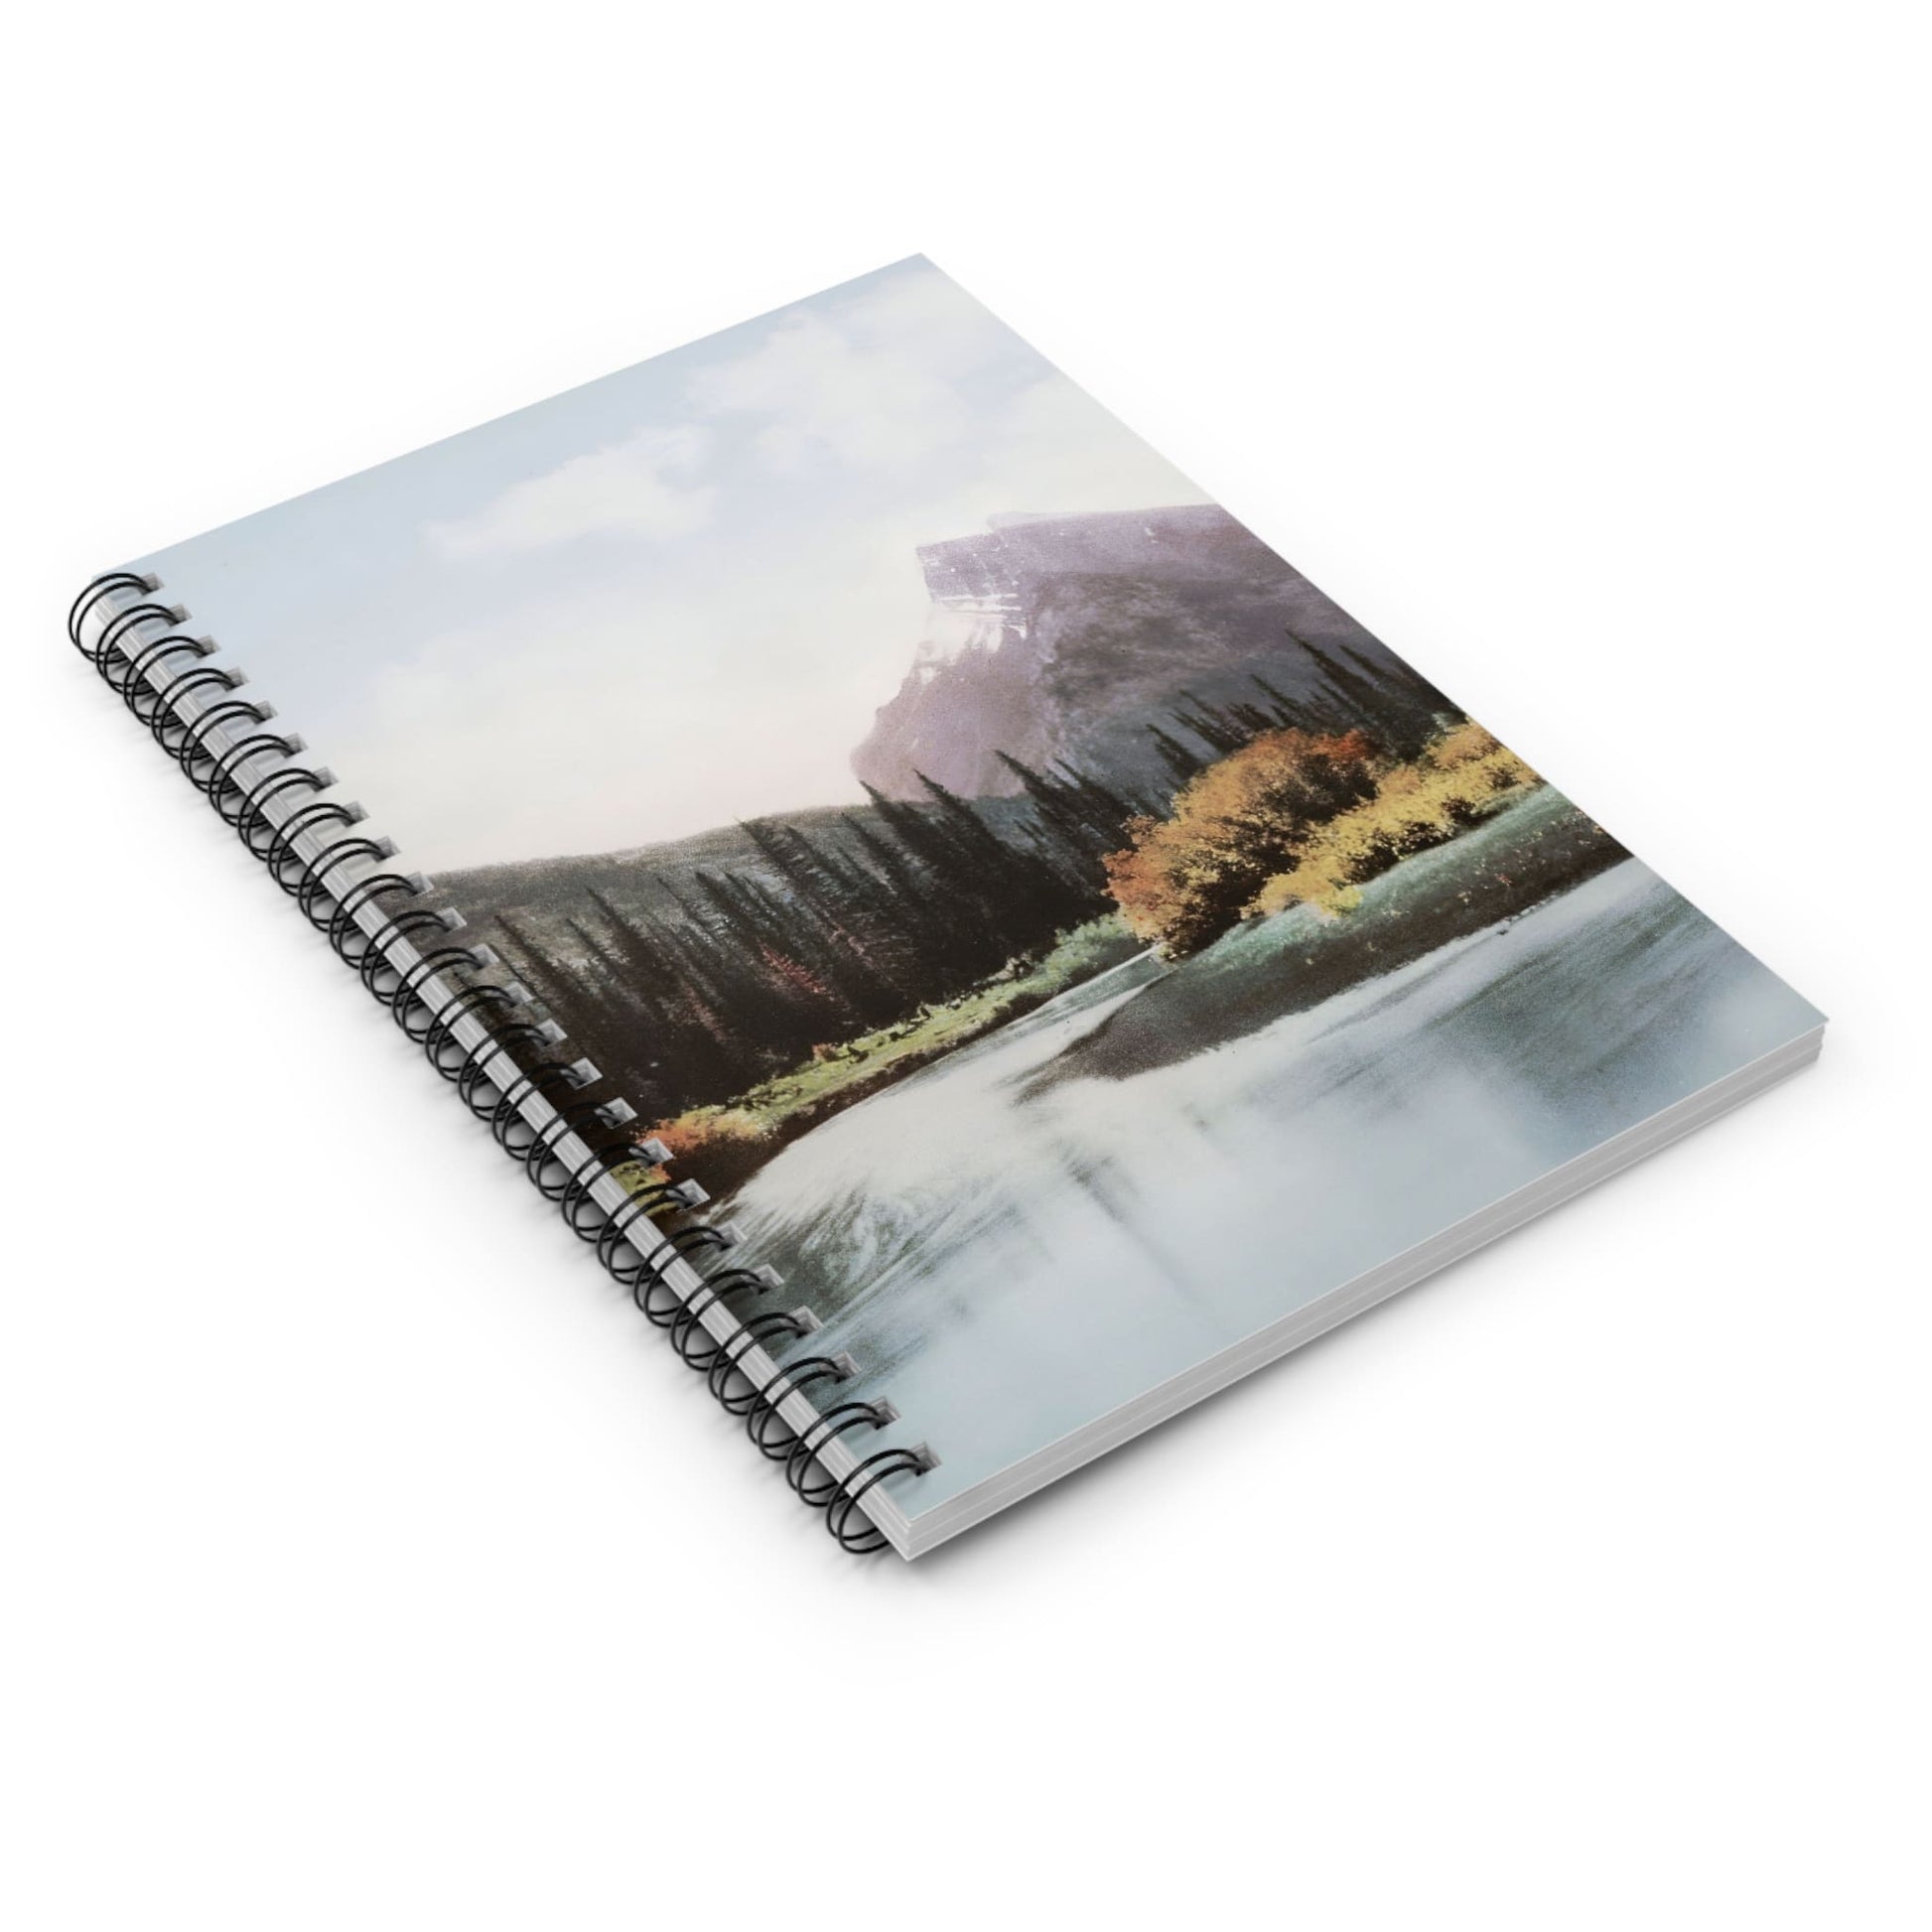 Canada Mountain Landscape Spiral Notebook Laying Flat on White Surface